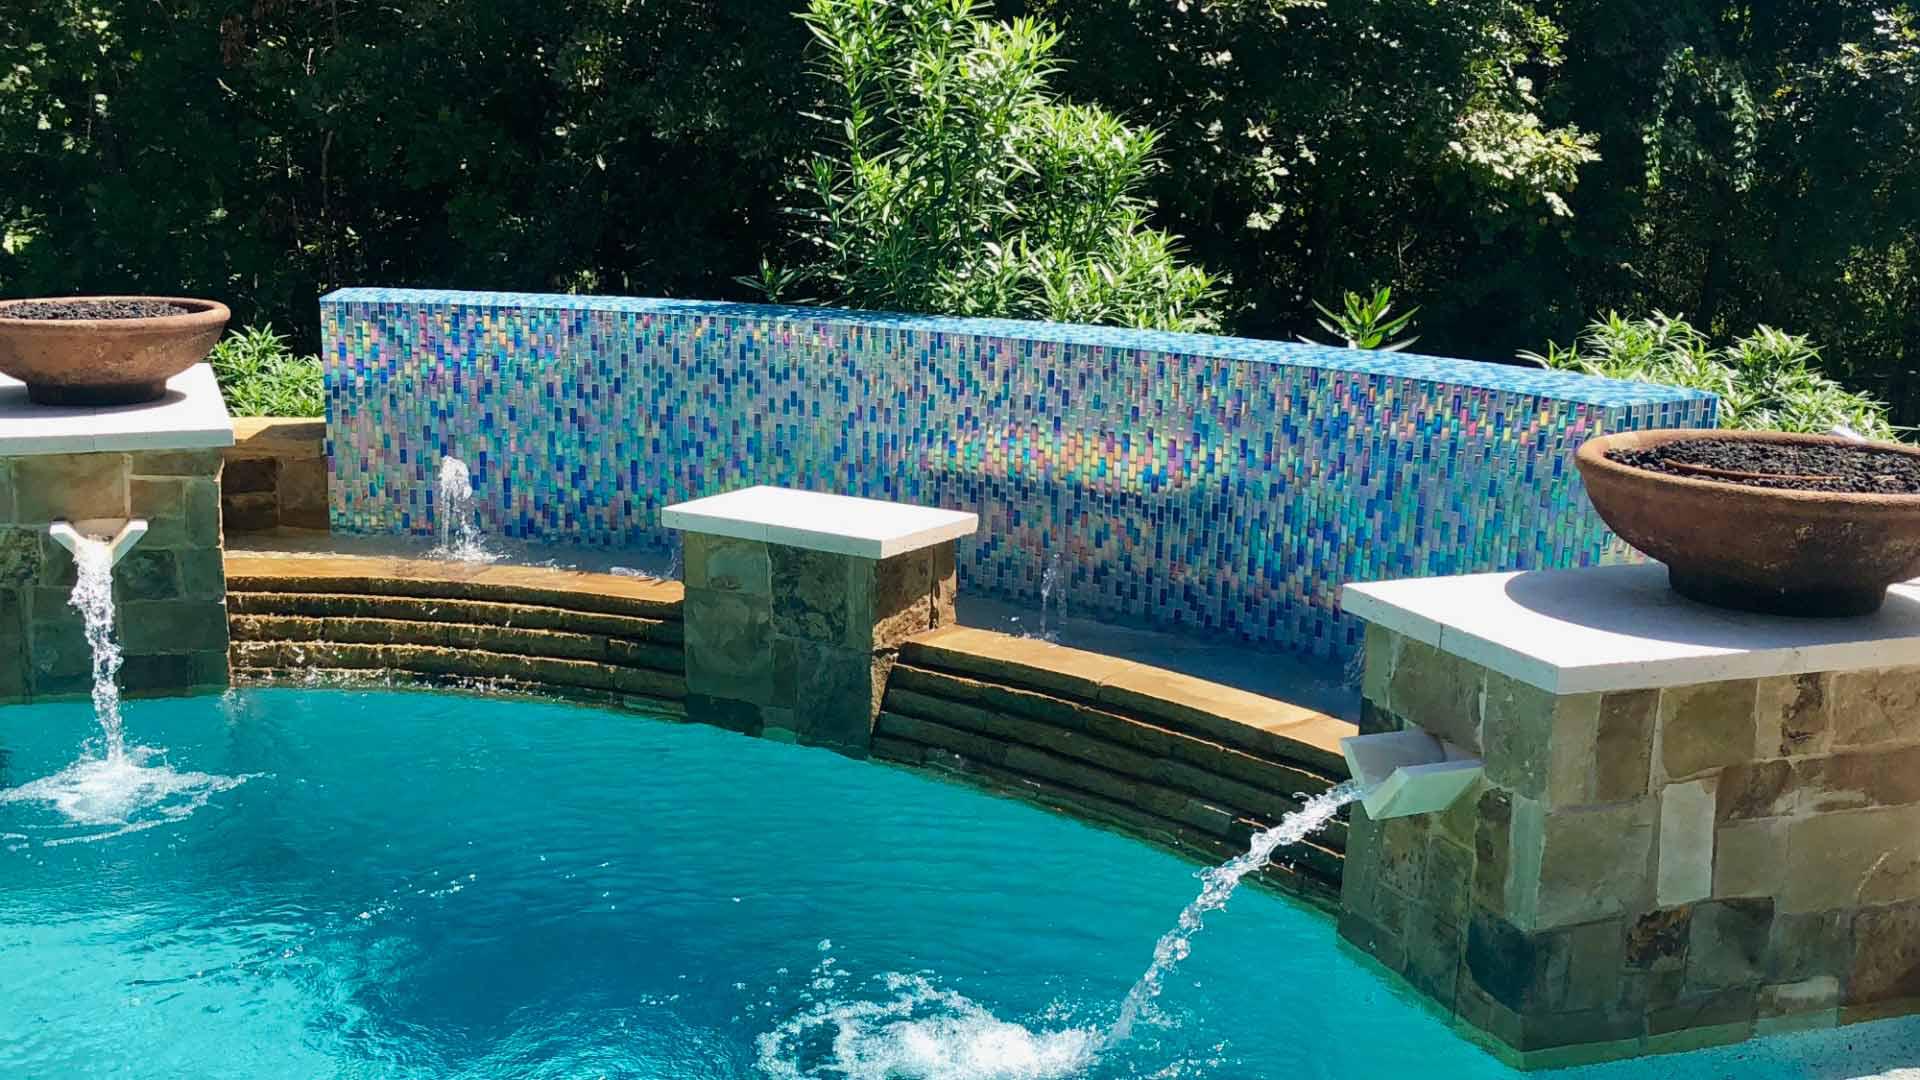 If you’re installing a custom pool on your property or need maintenance for an existing pool, contac The Pool Whisperer Spring (832)515-5774